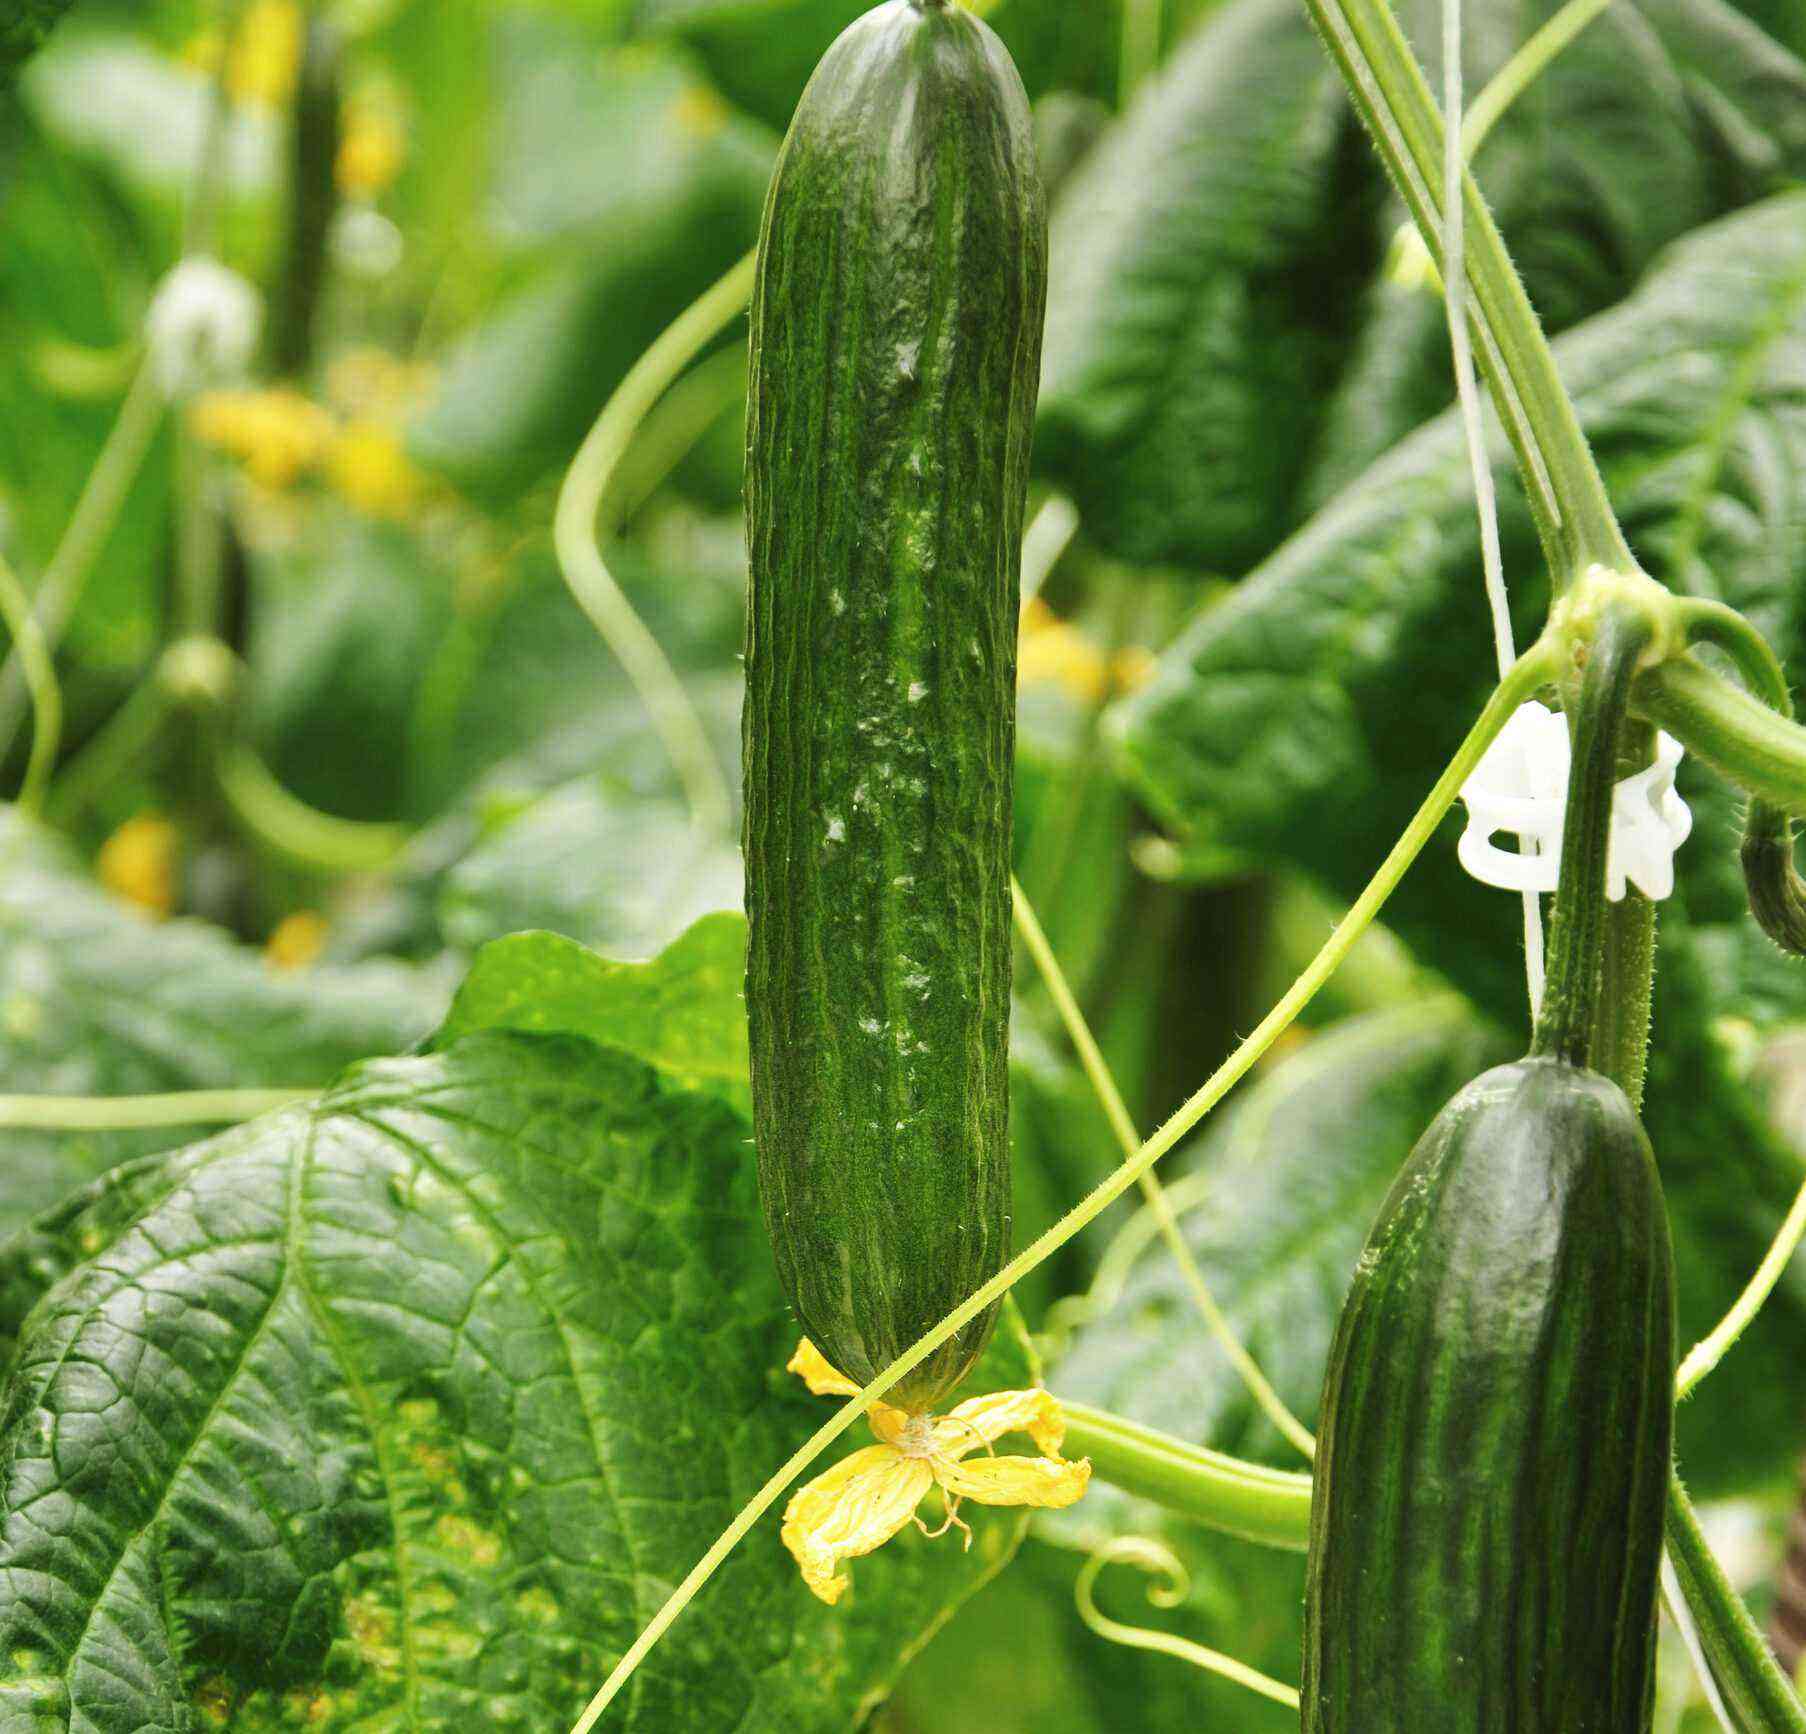 Cultivation of cucumbers in a greenhouse